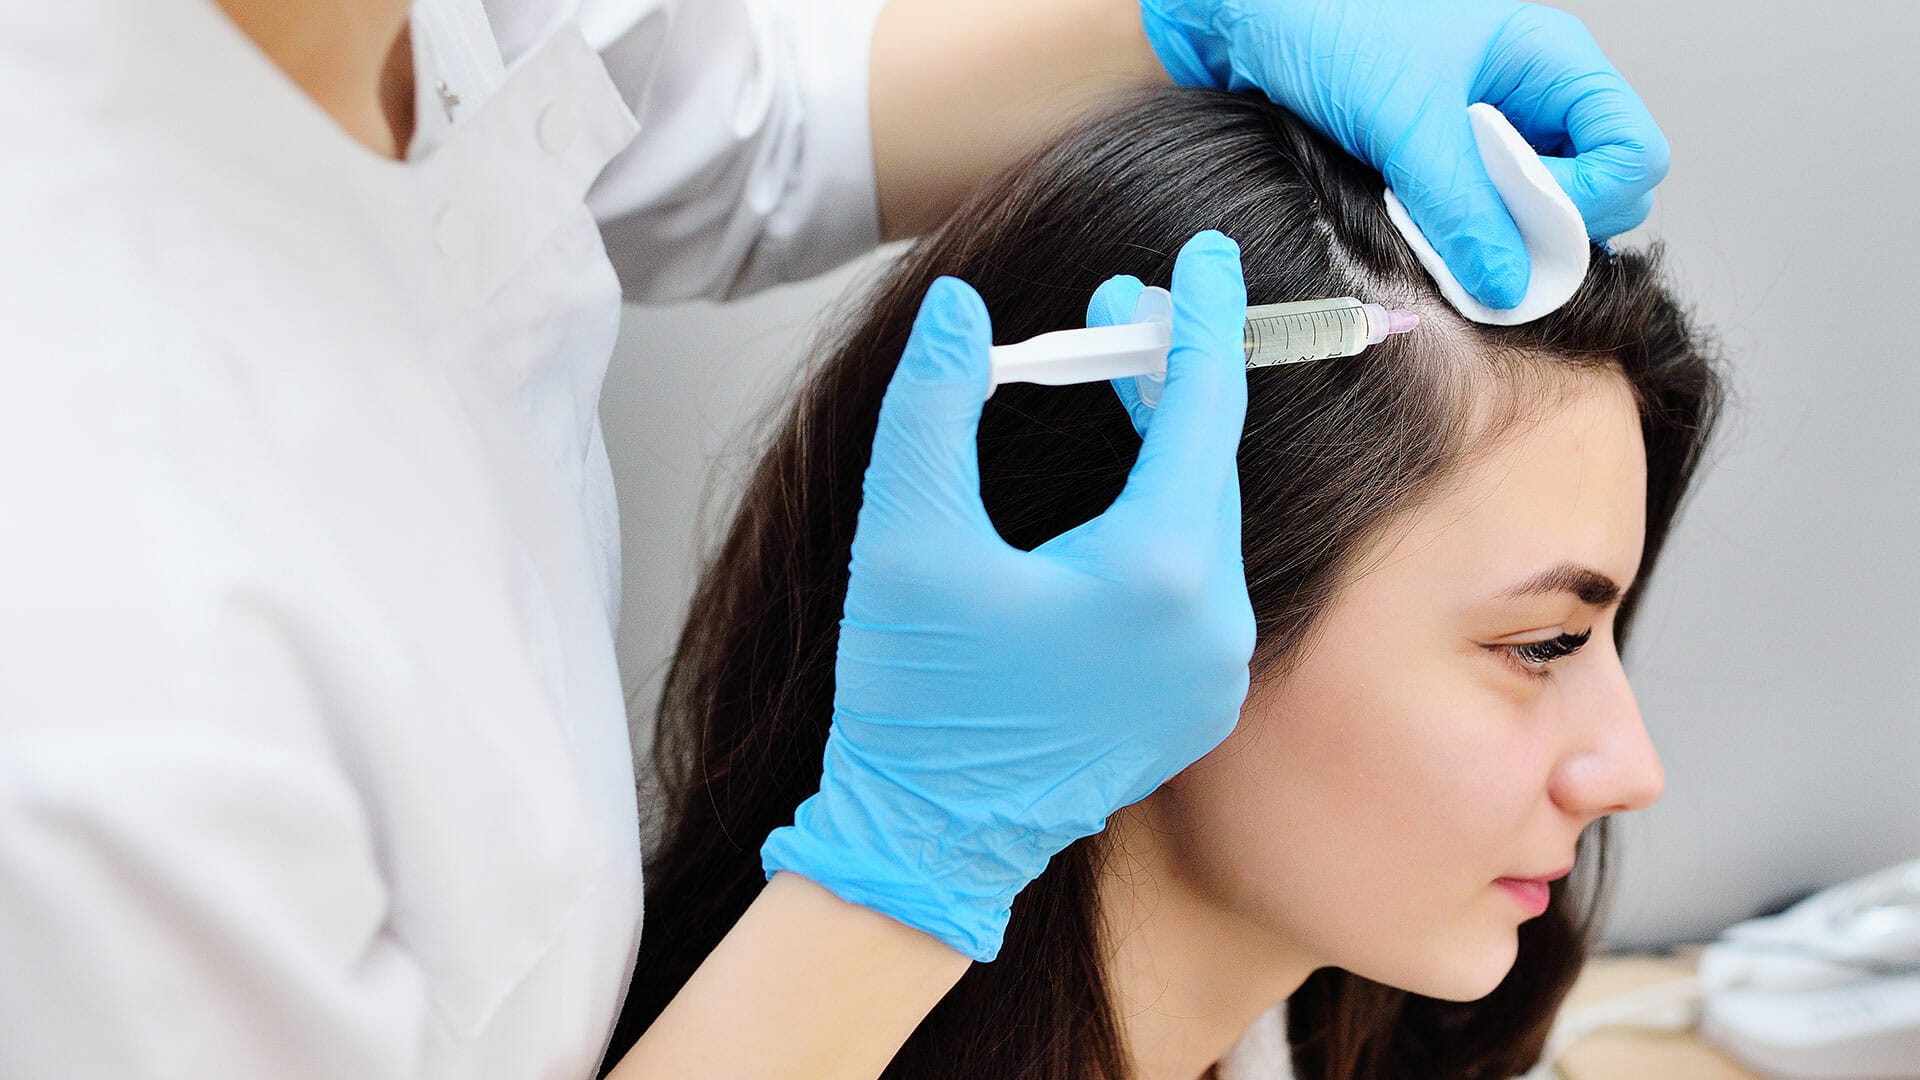 A woman patient is getting an injection on her scalp as part of her PRP hair treatment.